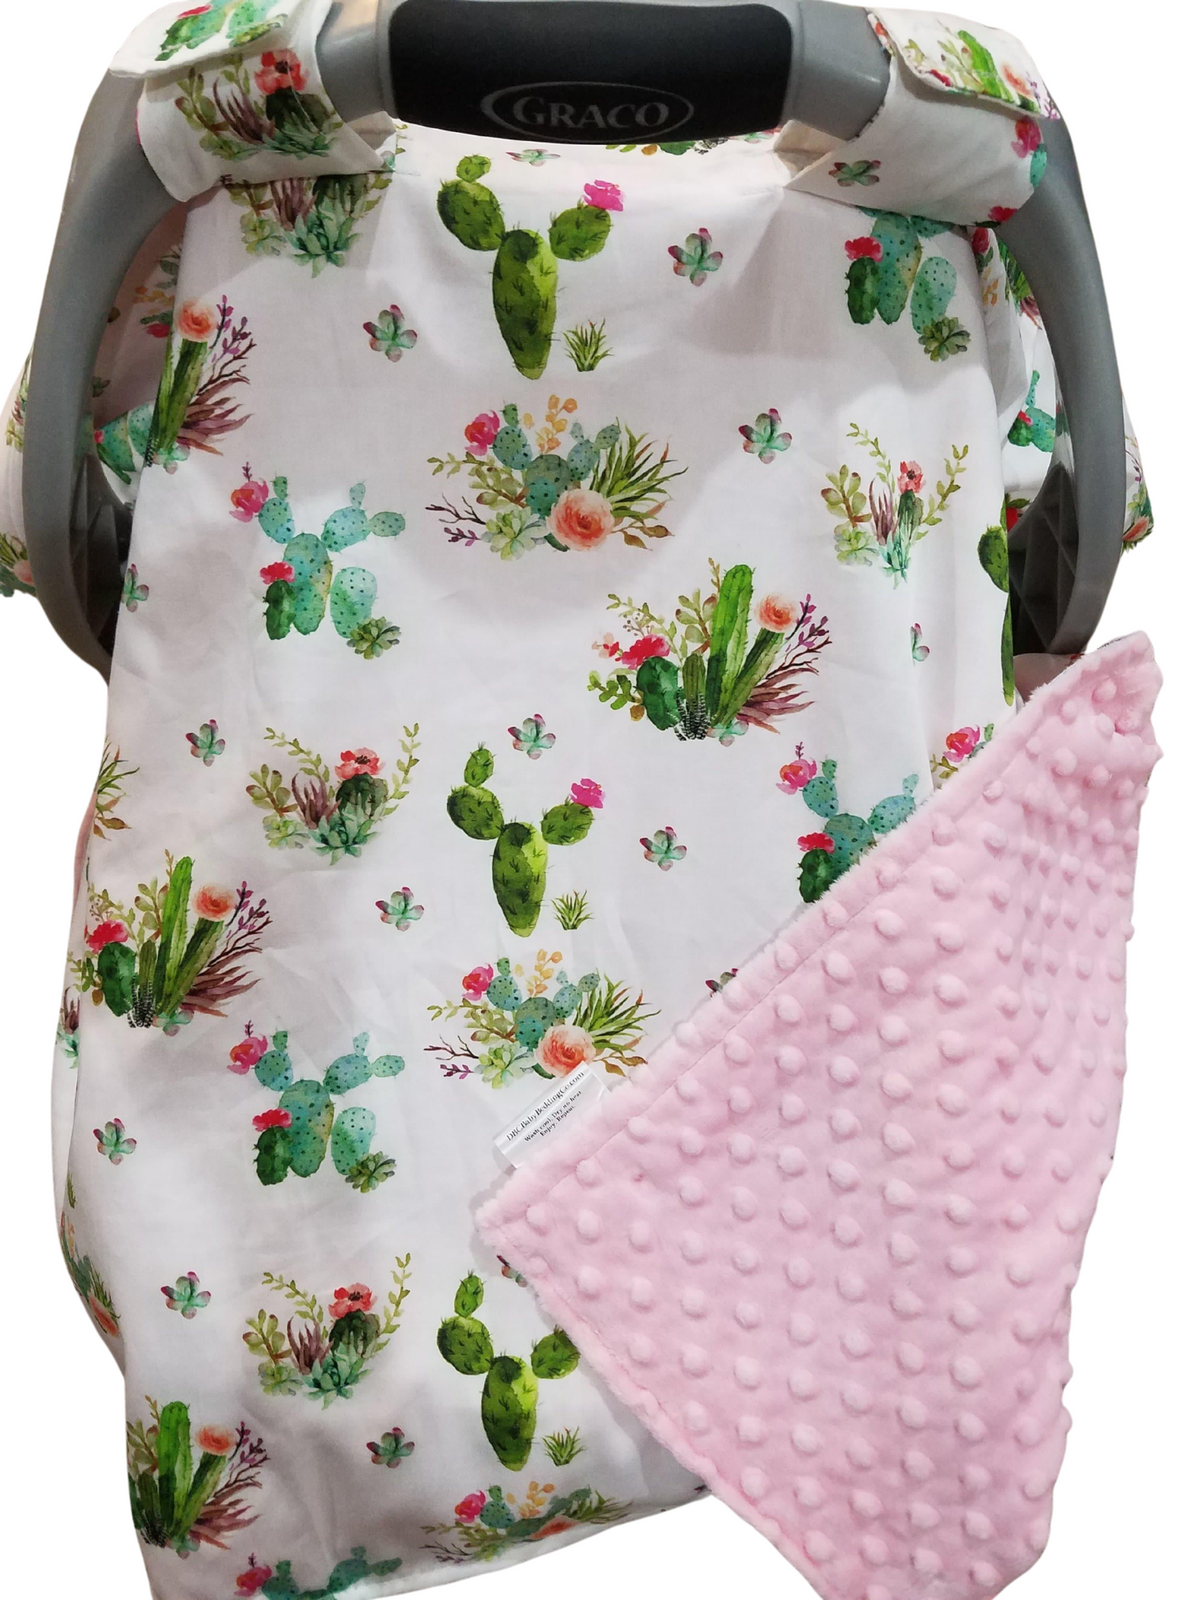 Carseat Tent - Floral Cactus Western Tent - DBC Baby Bedding Co 